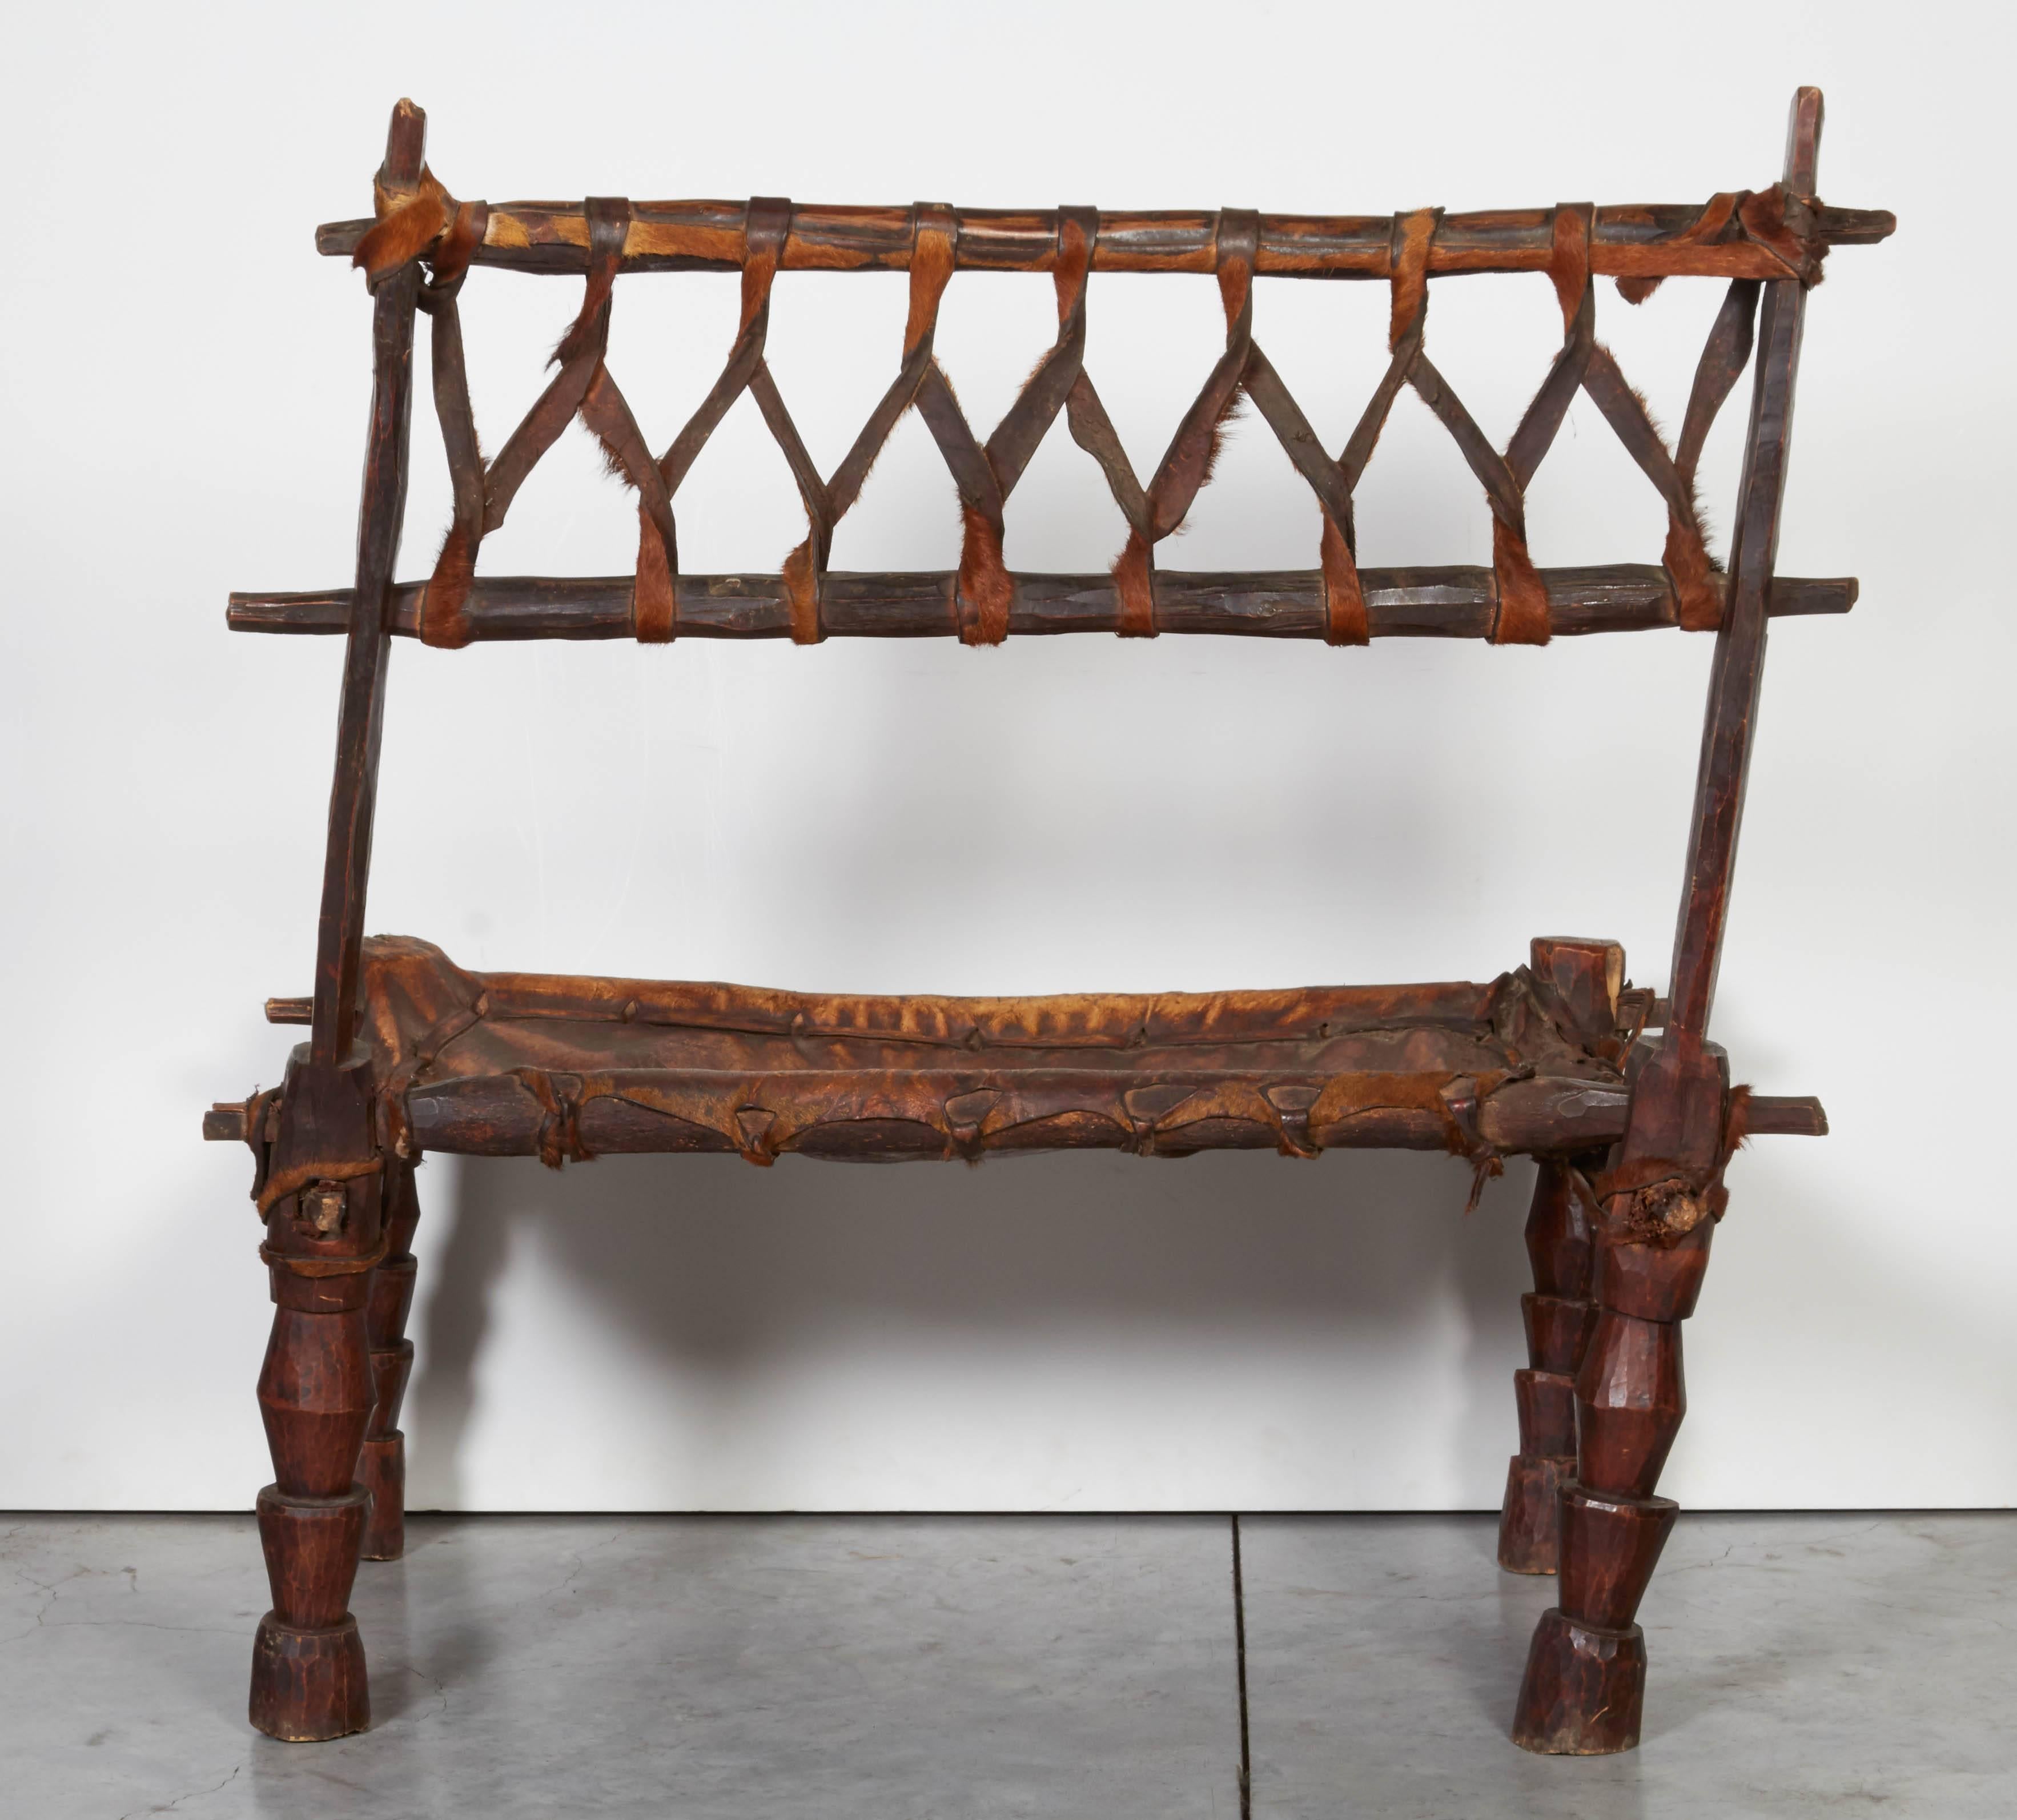 20th Century Rustic Antique Wood and Leather Bench with Great Patina and Character For Sale